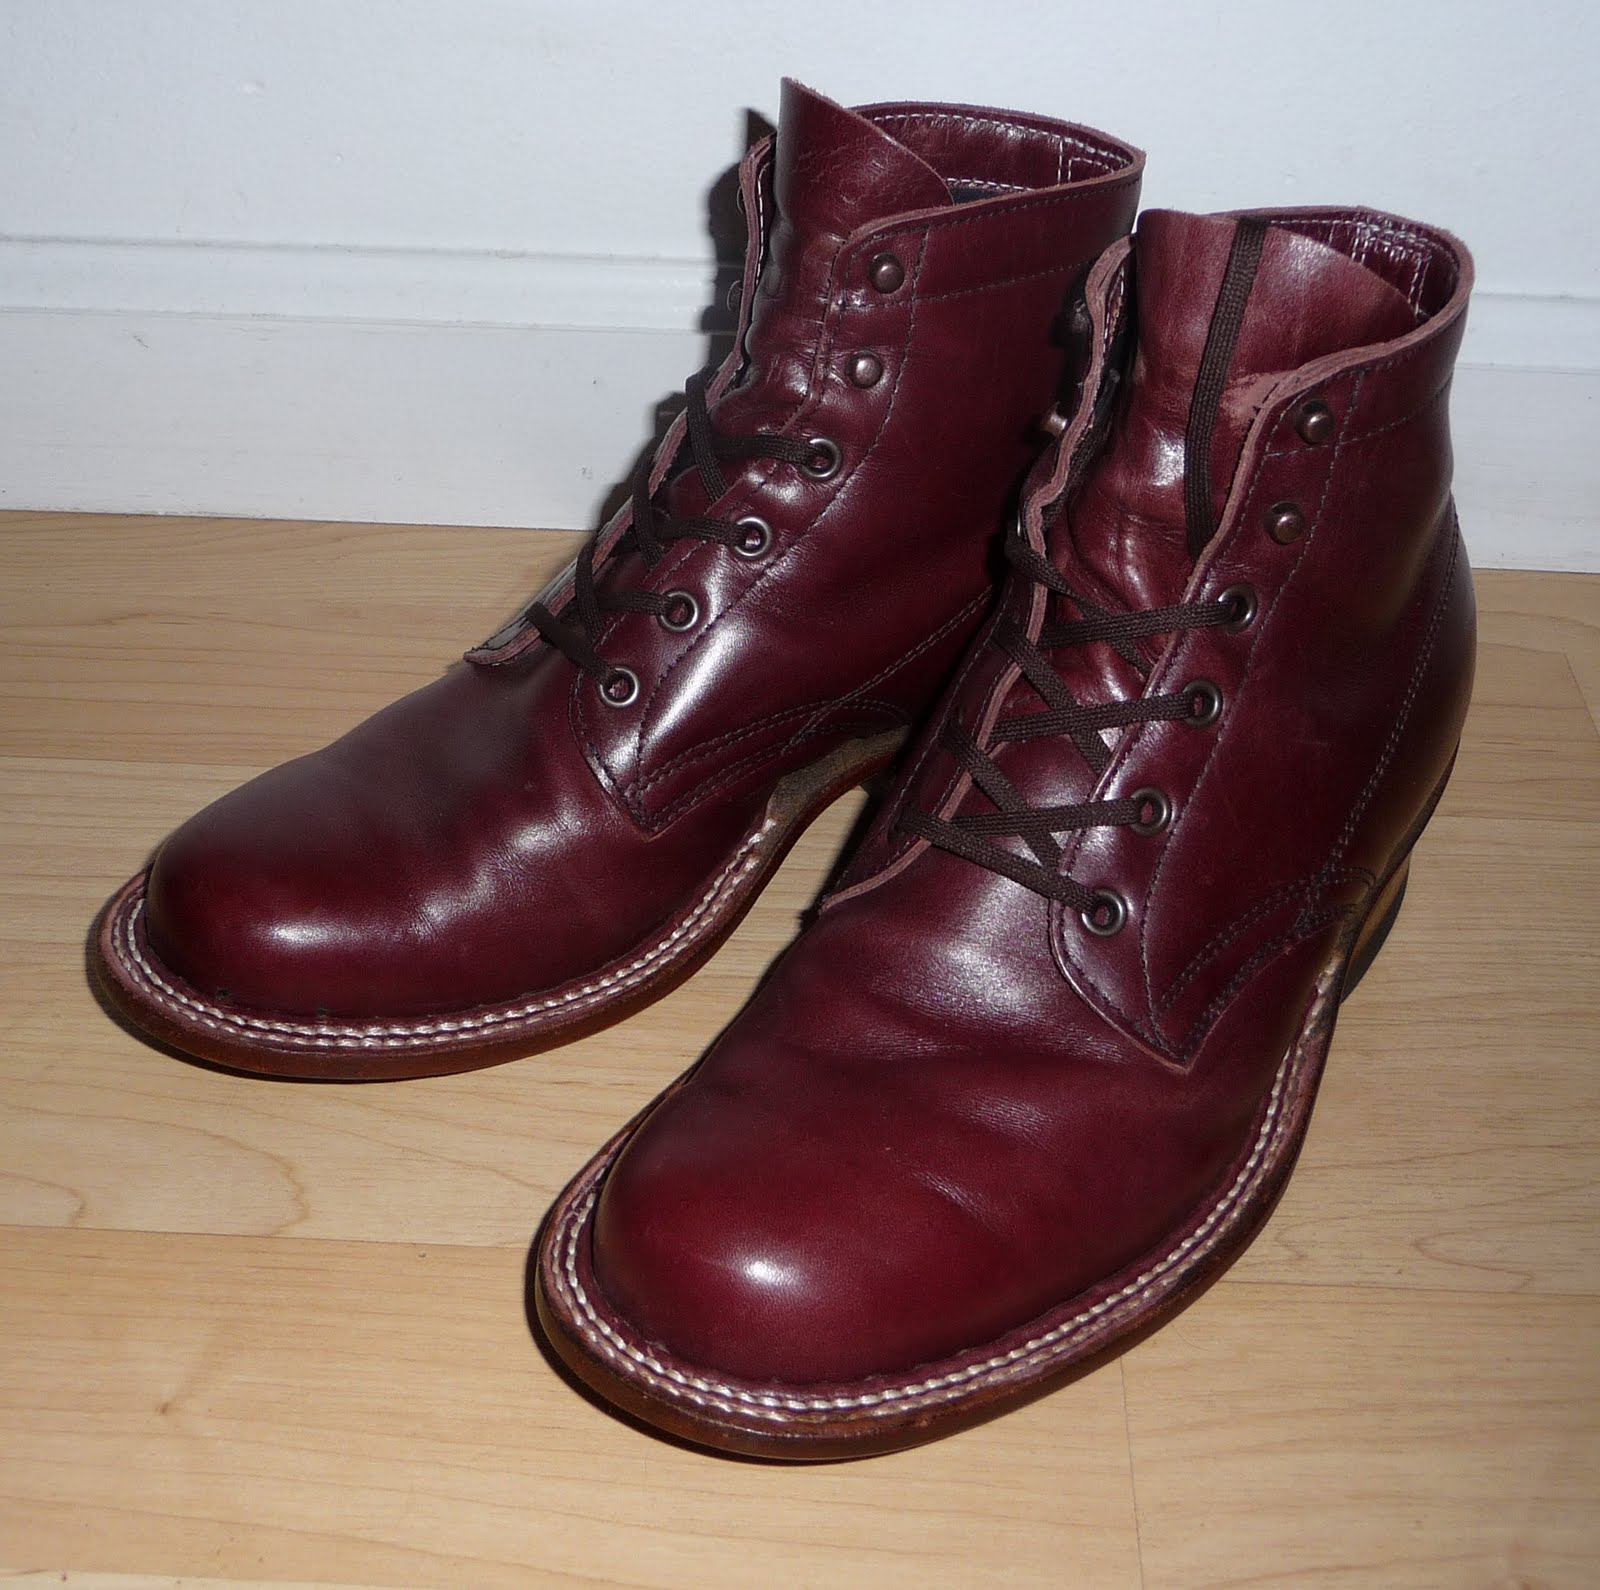 Vintage Engineer Boots: BEWARE - WHITE'S SEMI-DRESS BOOTS